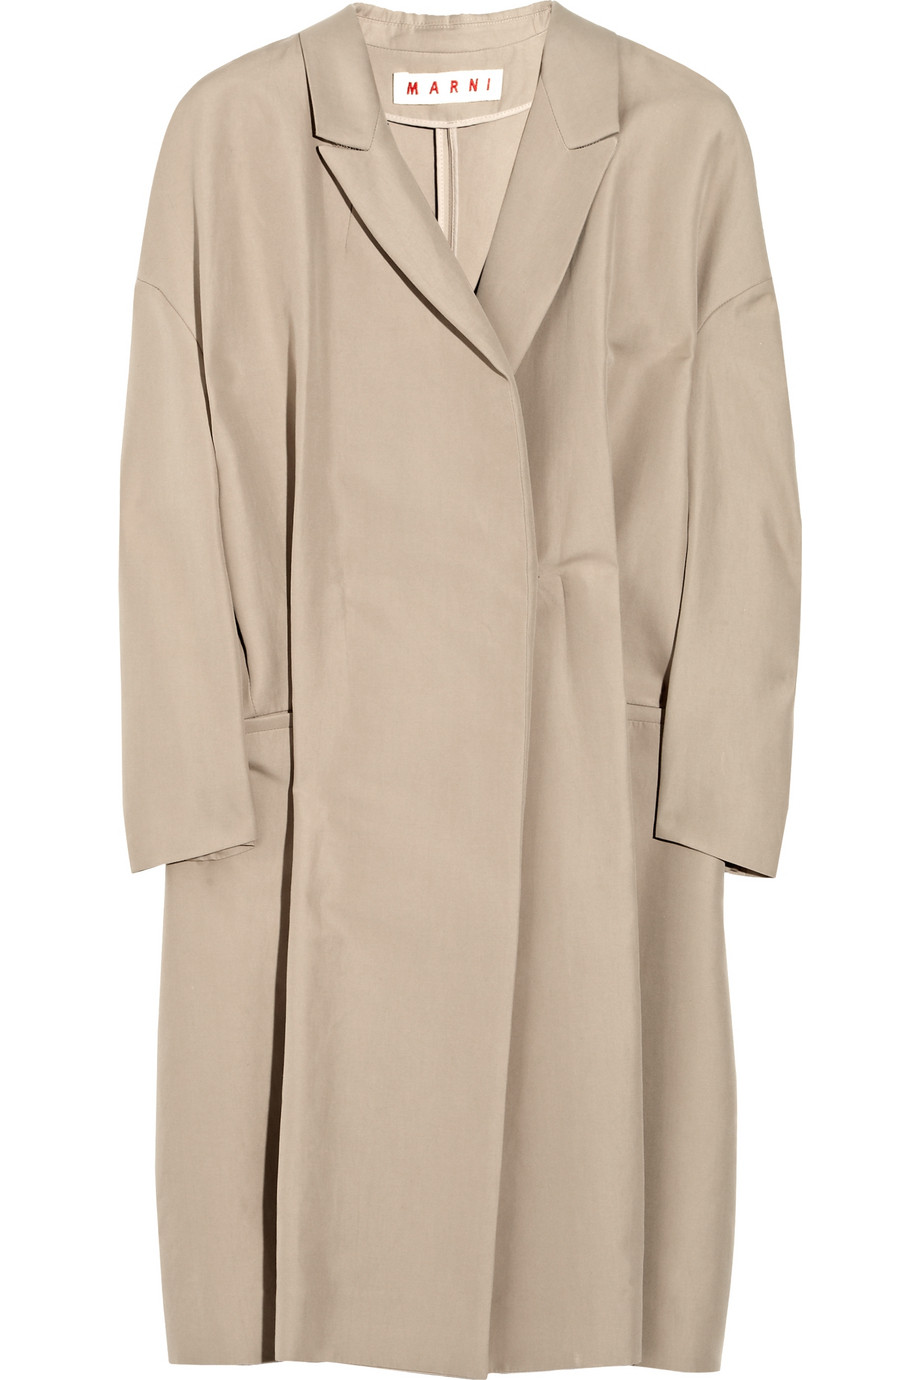 Marni Pleated Cotton Duster Coat in Brown (taupe) | Lyst